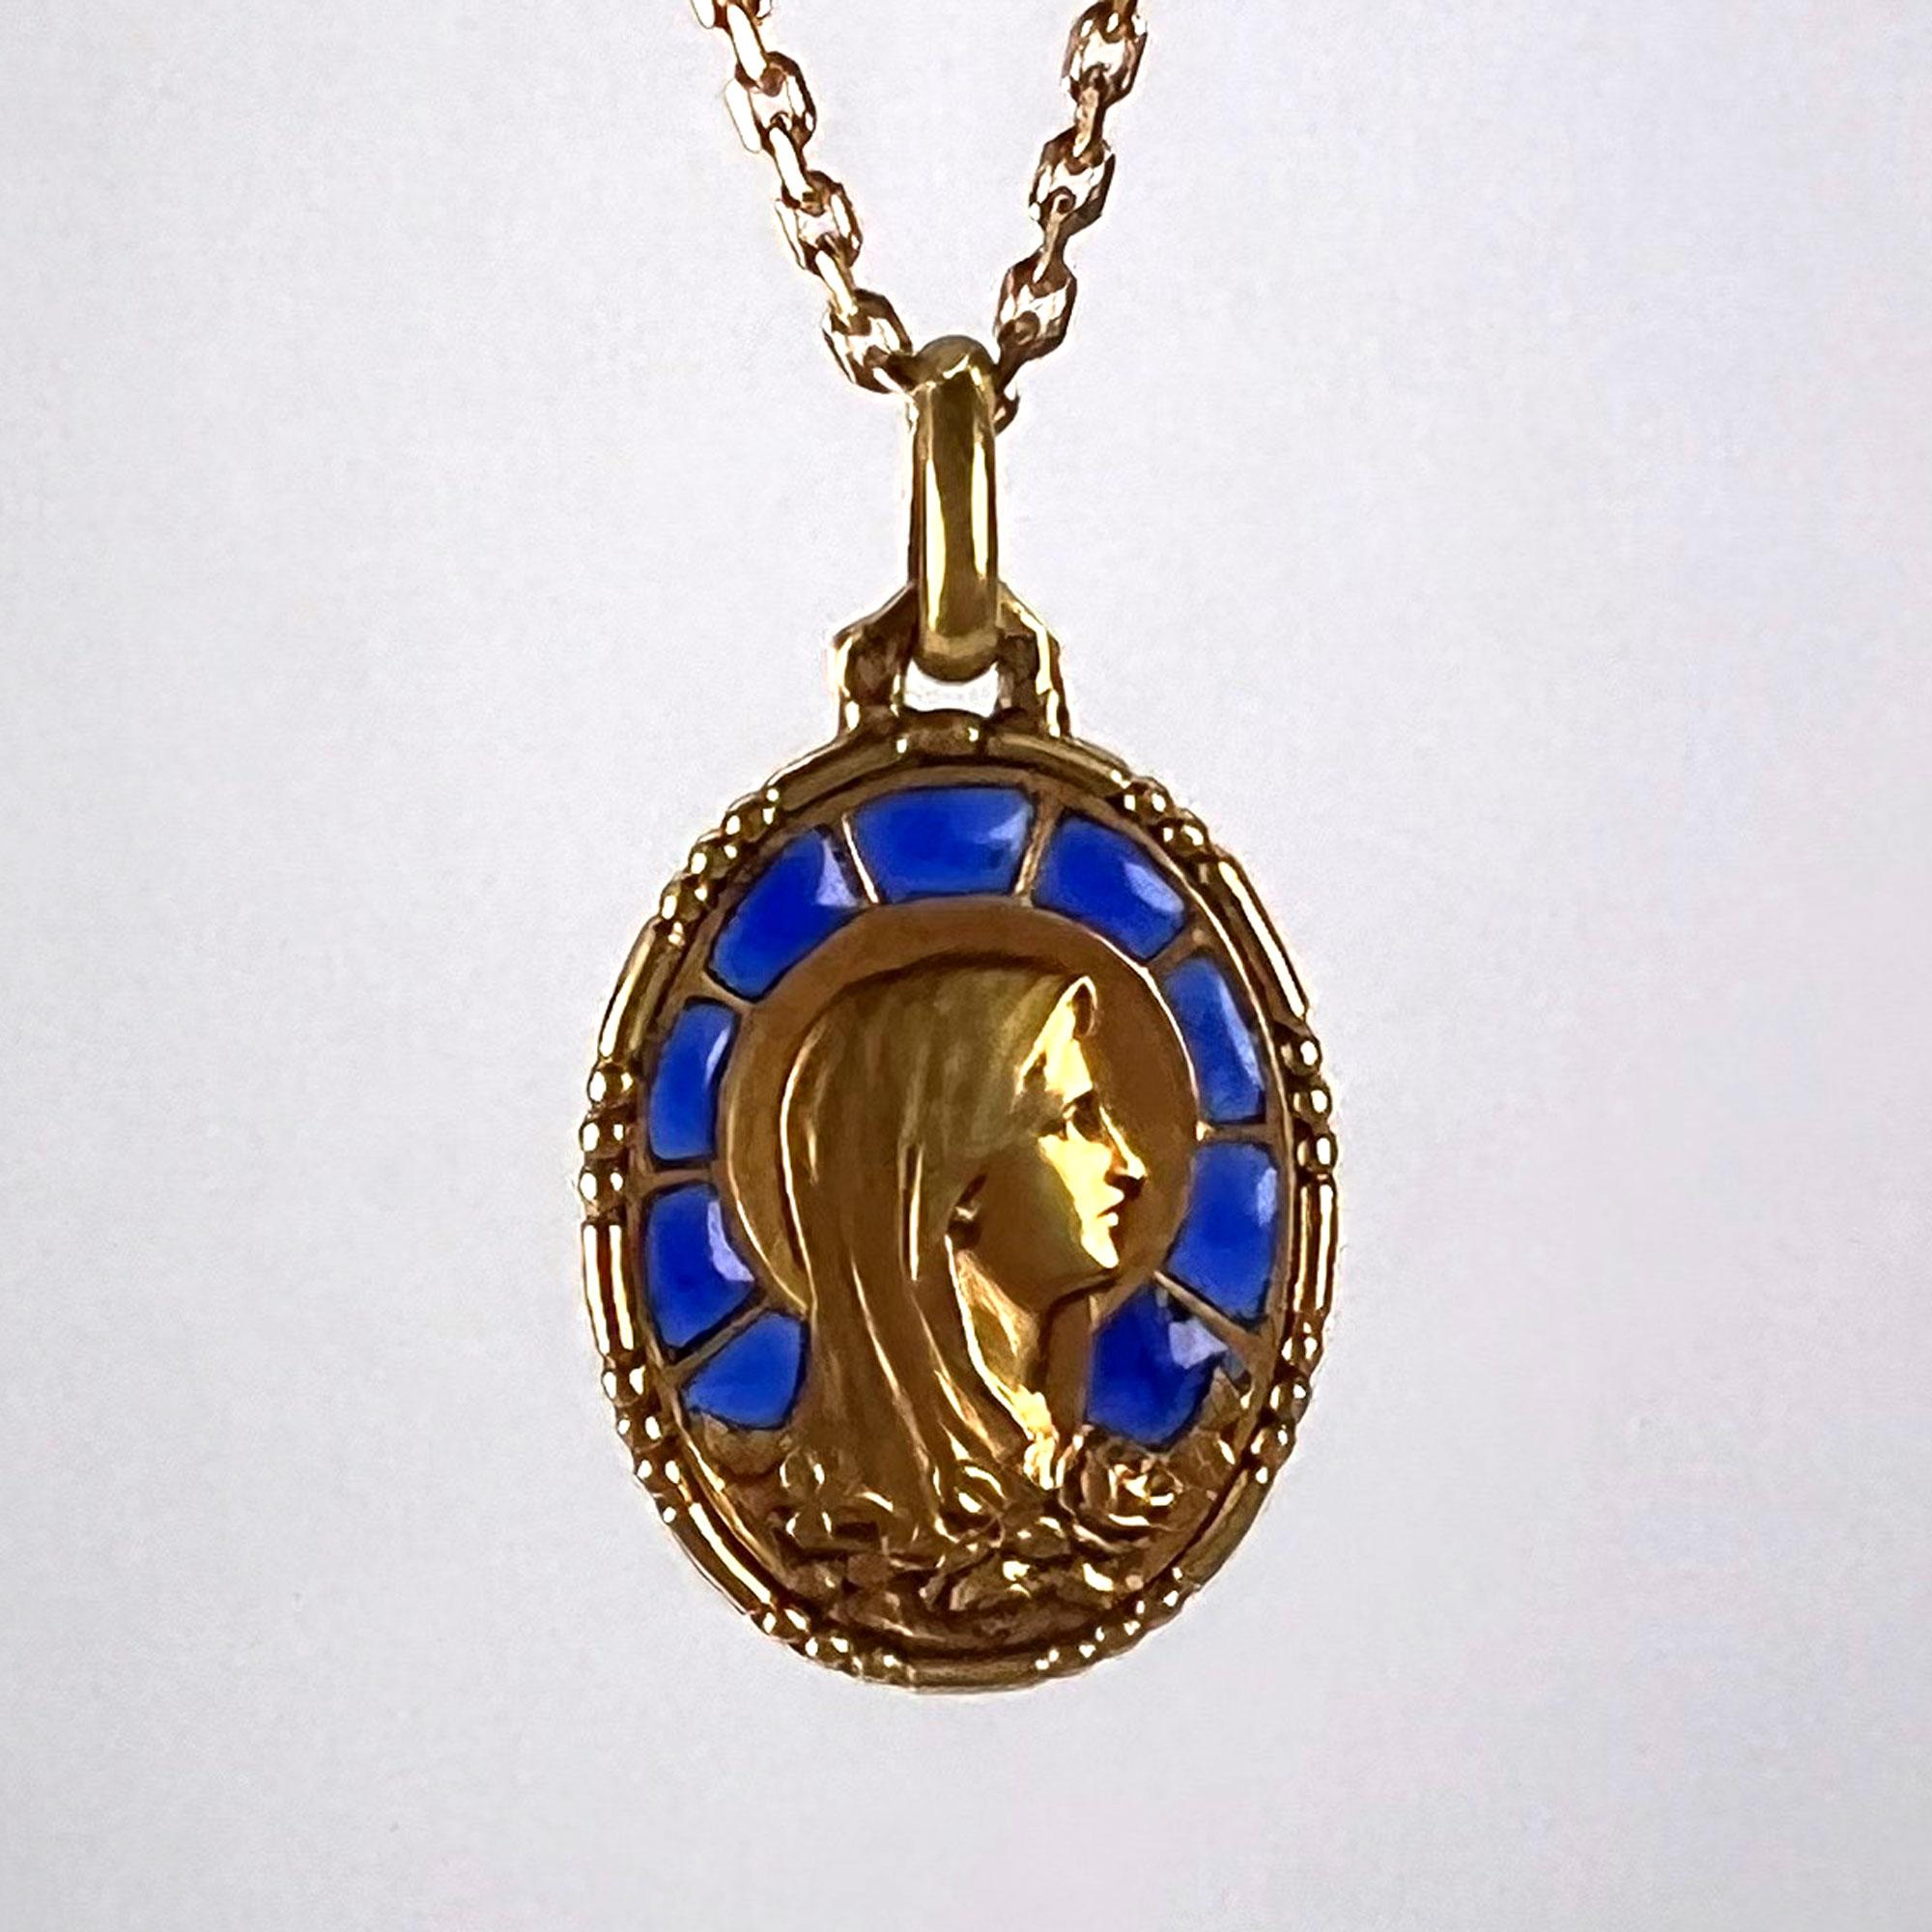 French Virgin Mary Plique A Jour Enamel 18K Yellow Gold Charm Pendant For Sale 9